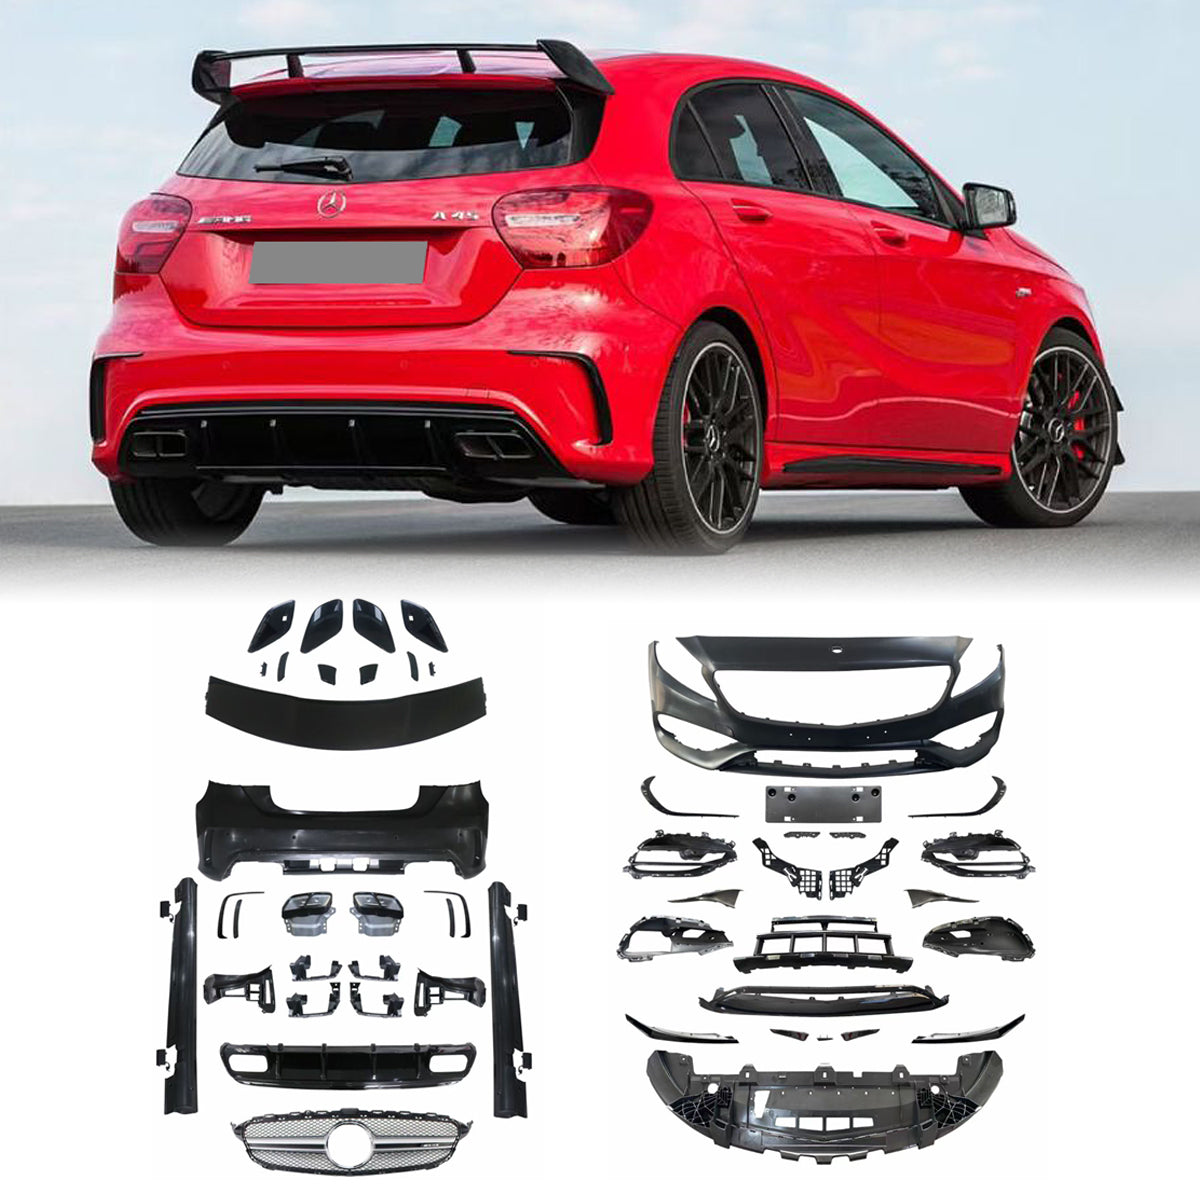 BODY KIT FOR A-CLASS W176 2013-2018 UPGRADE TO A45 AMG